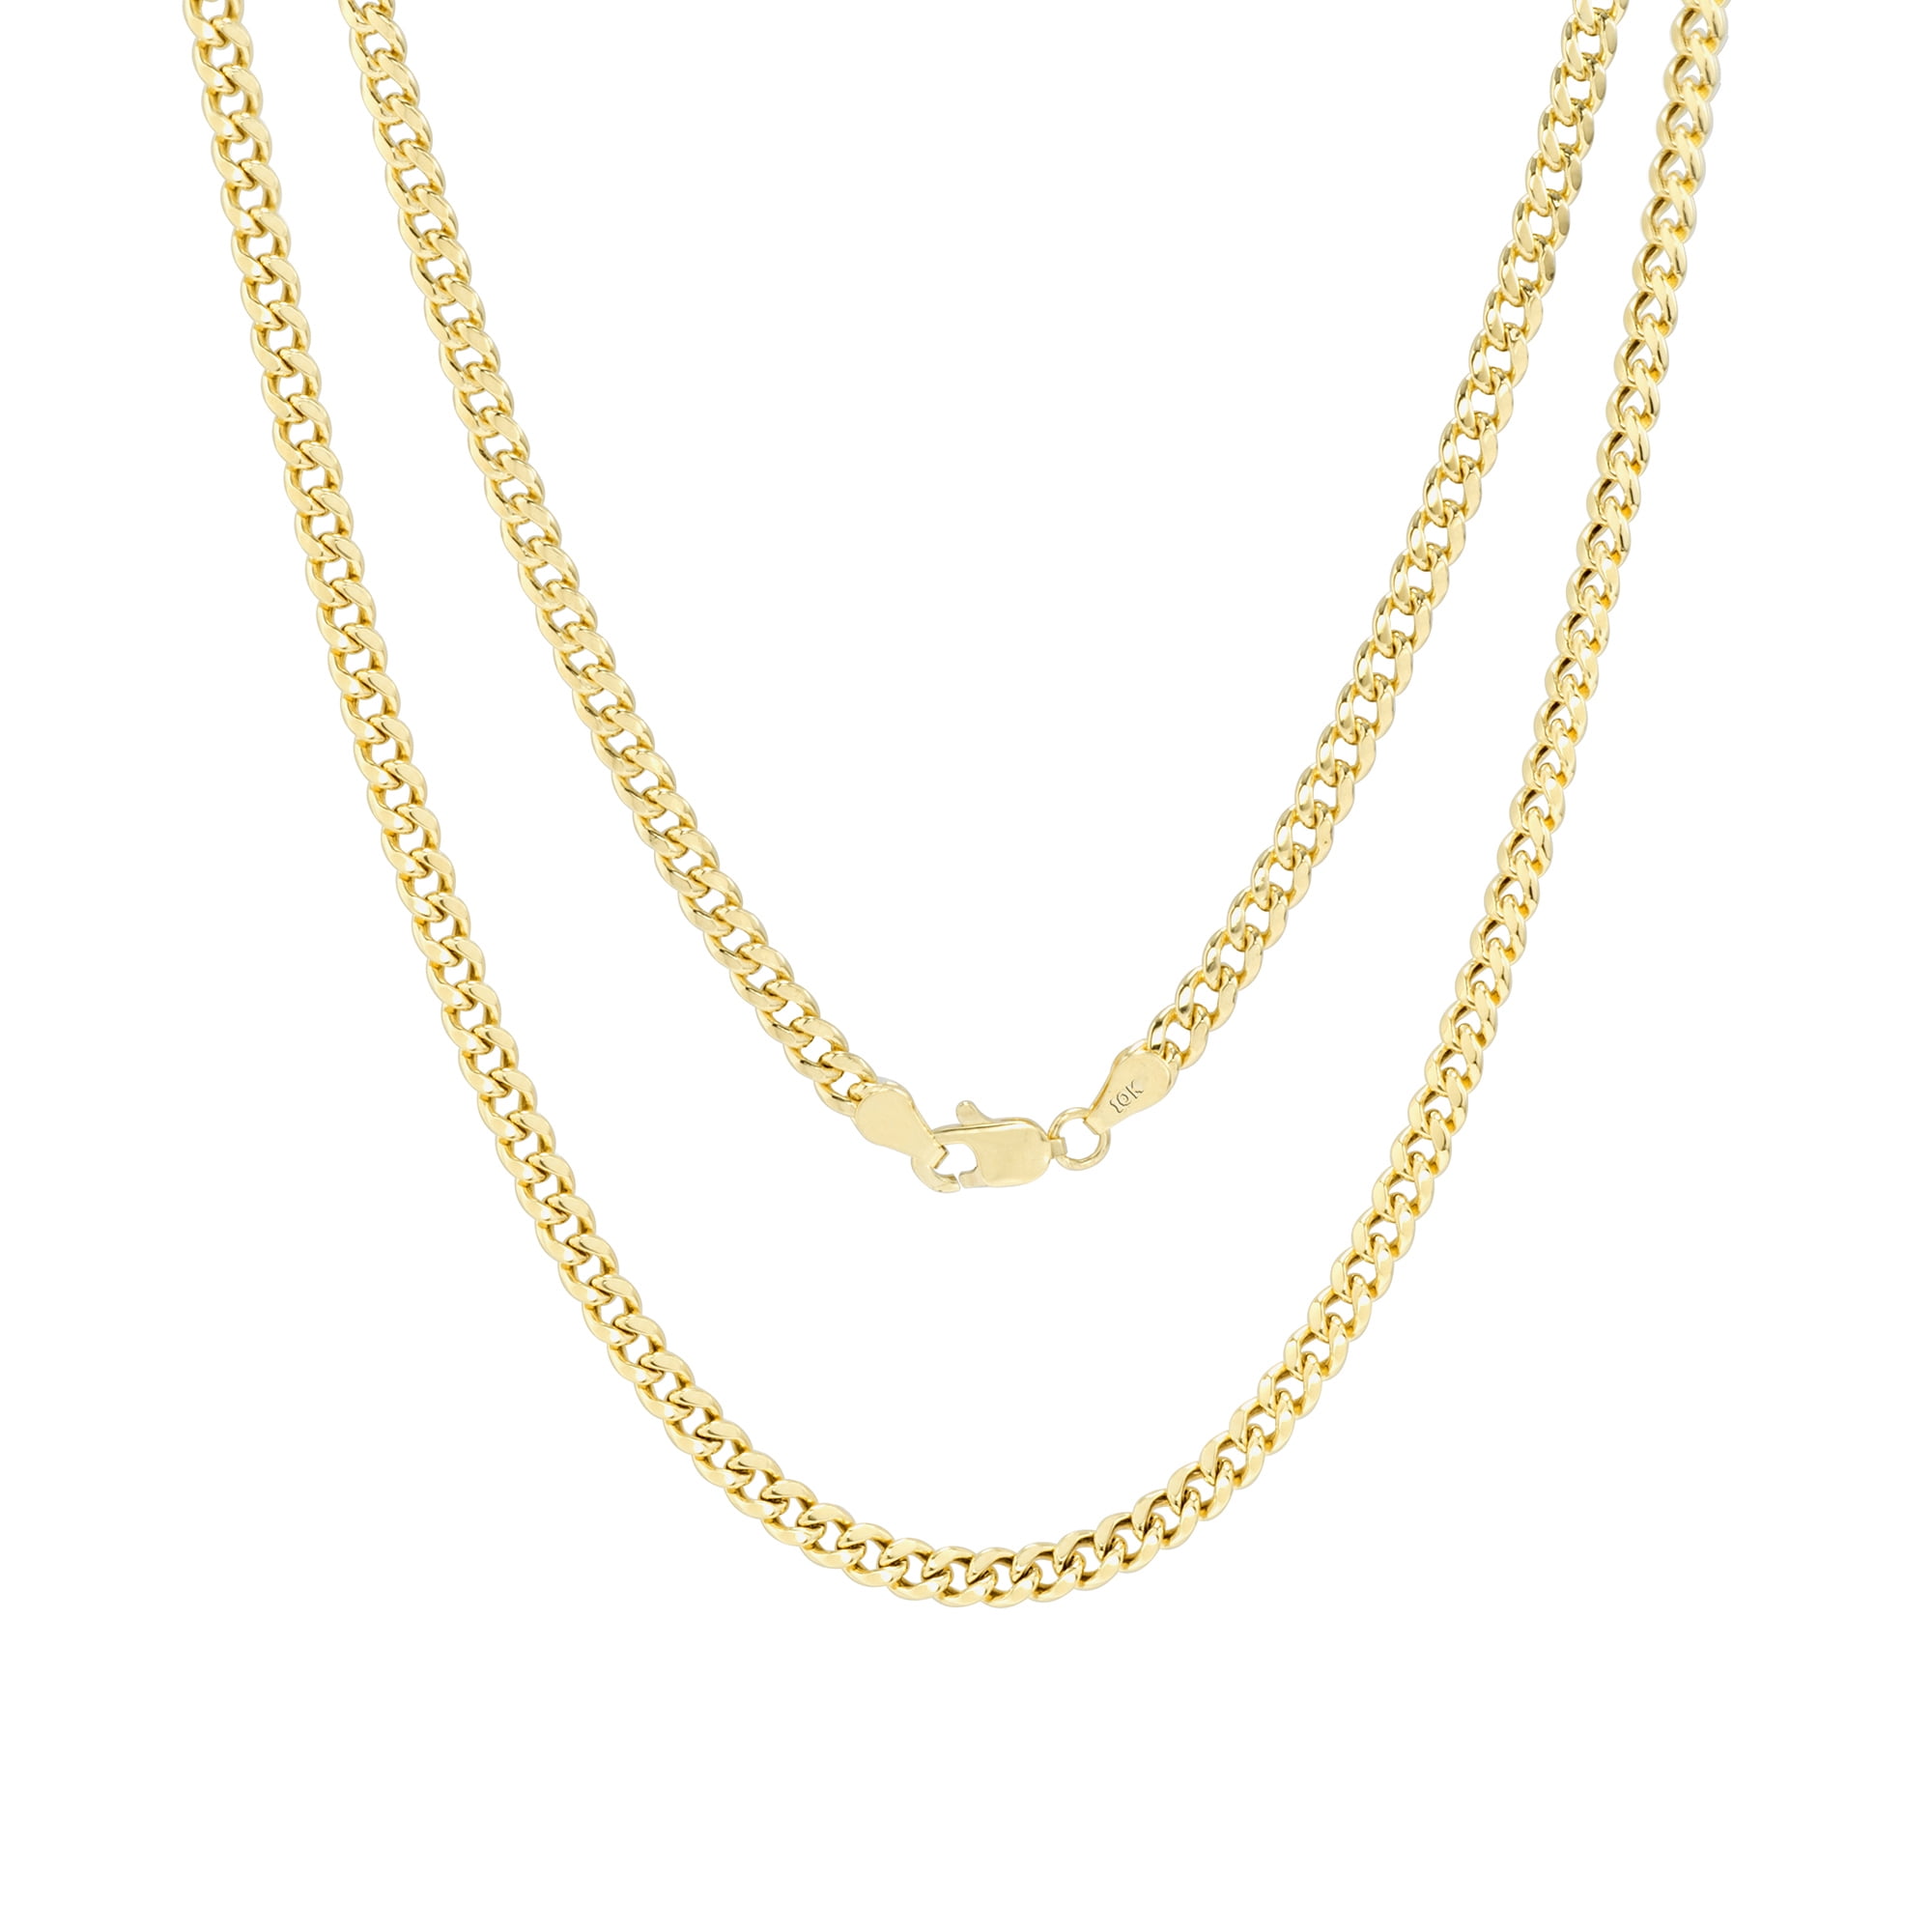 10K SOLID GOLD CUBAN LINK CHAIN NECKLACE FOR MEN WOMEN 2mm~4mm 16"~30" 